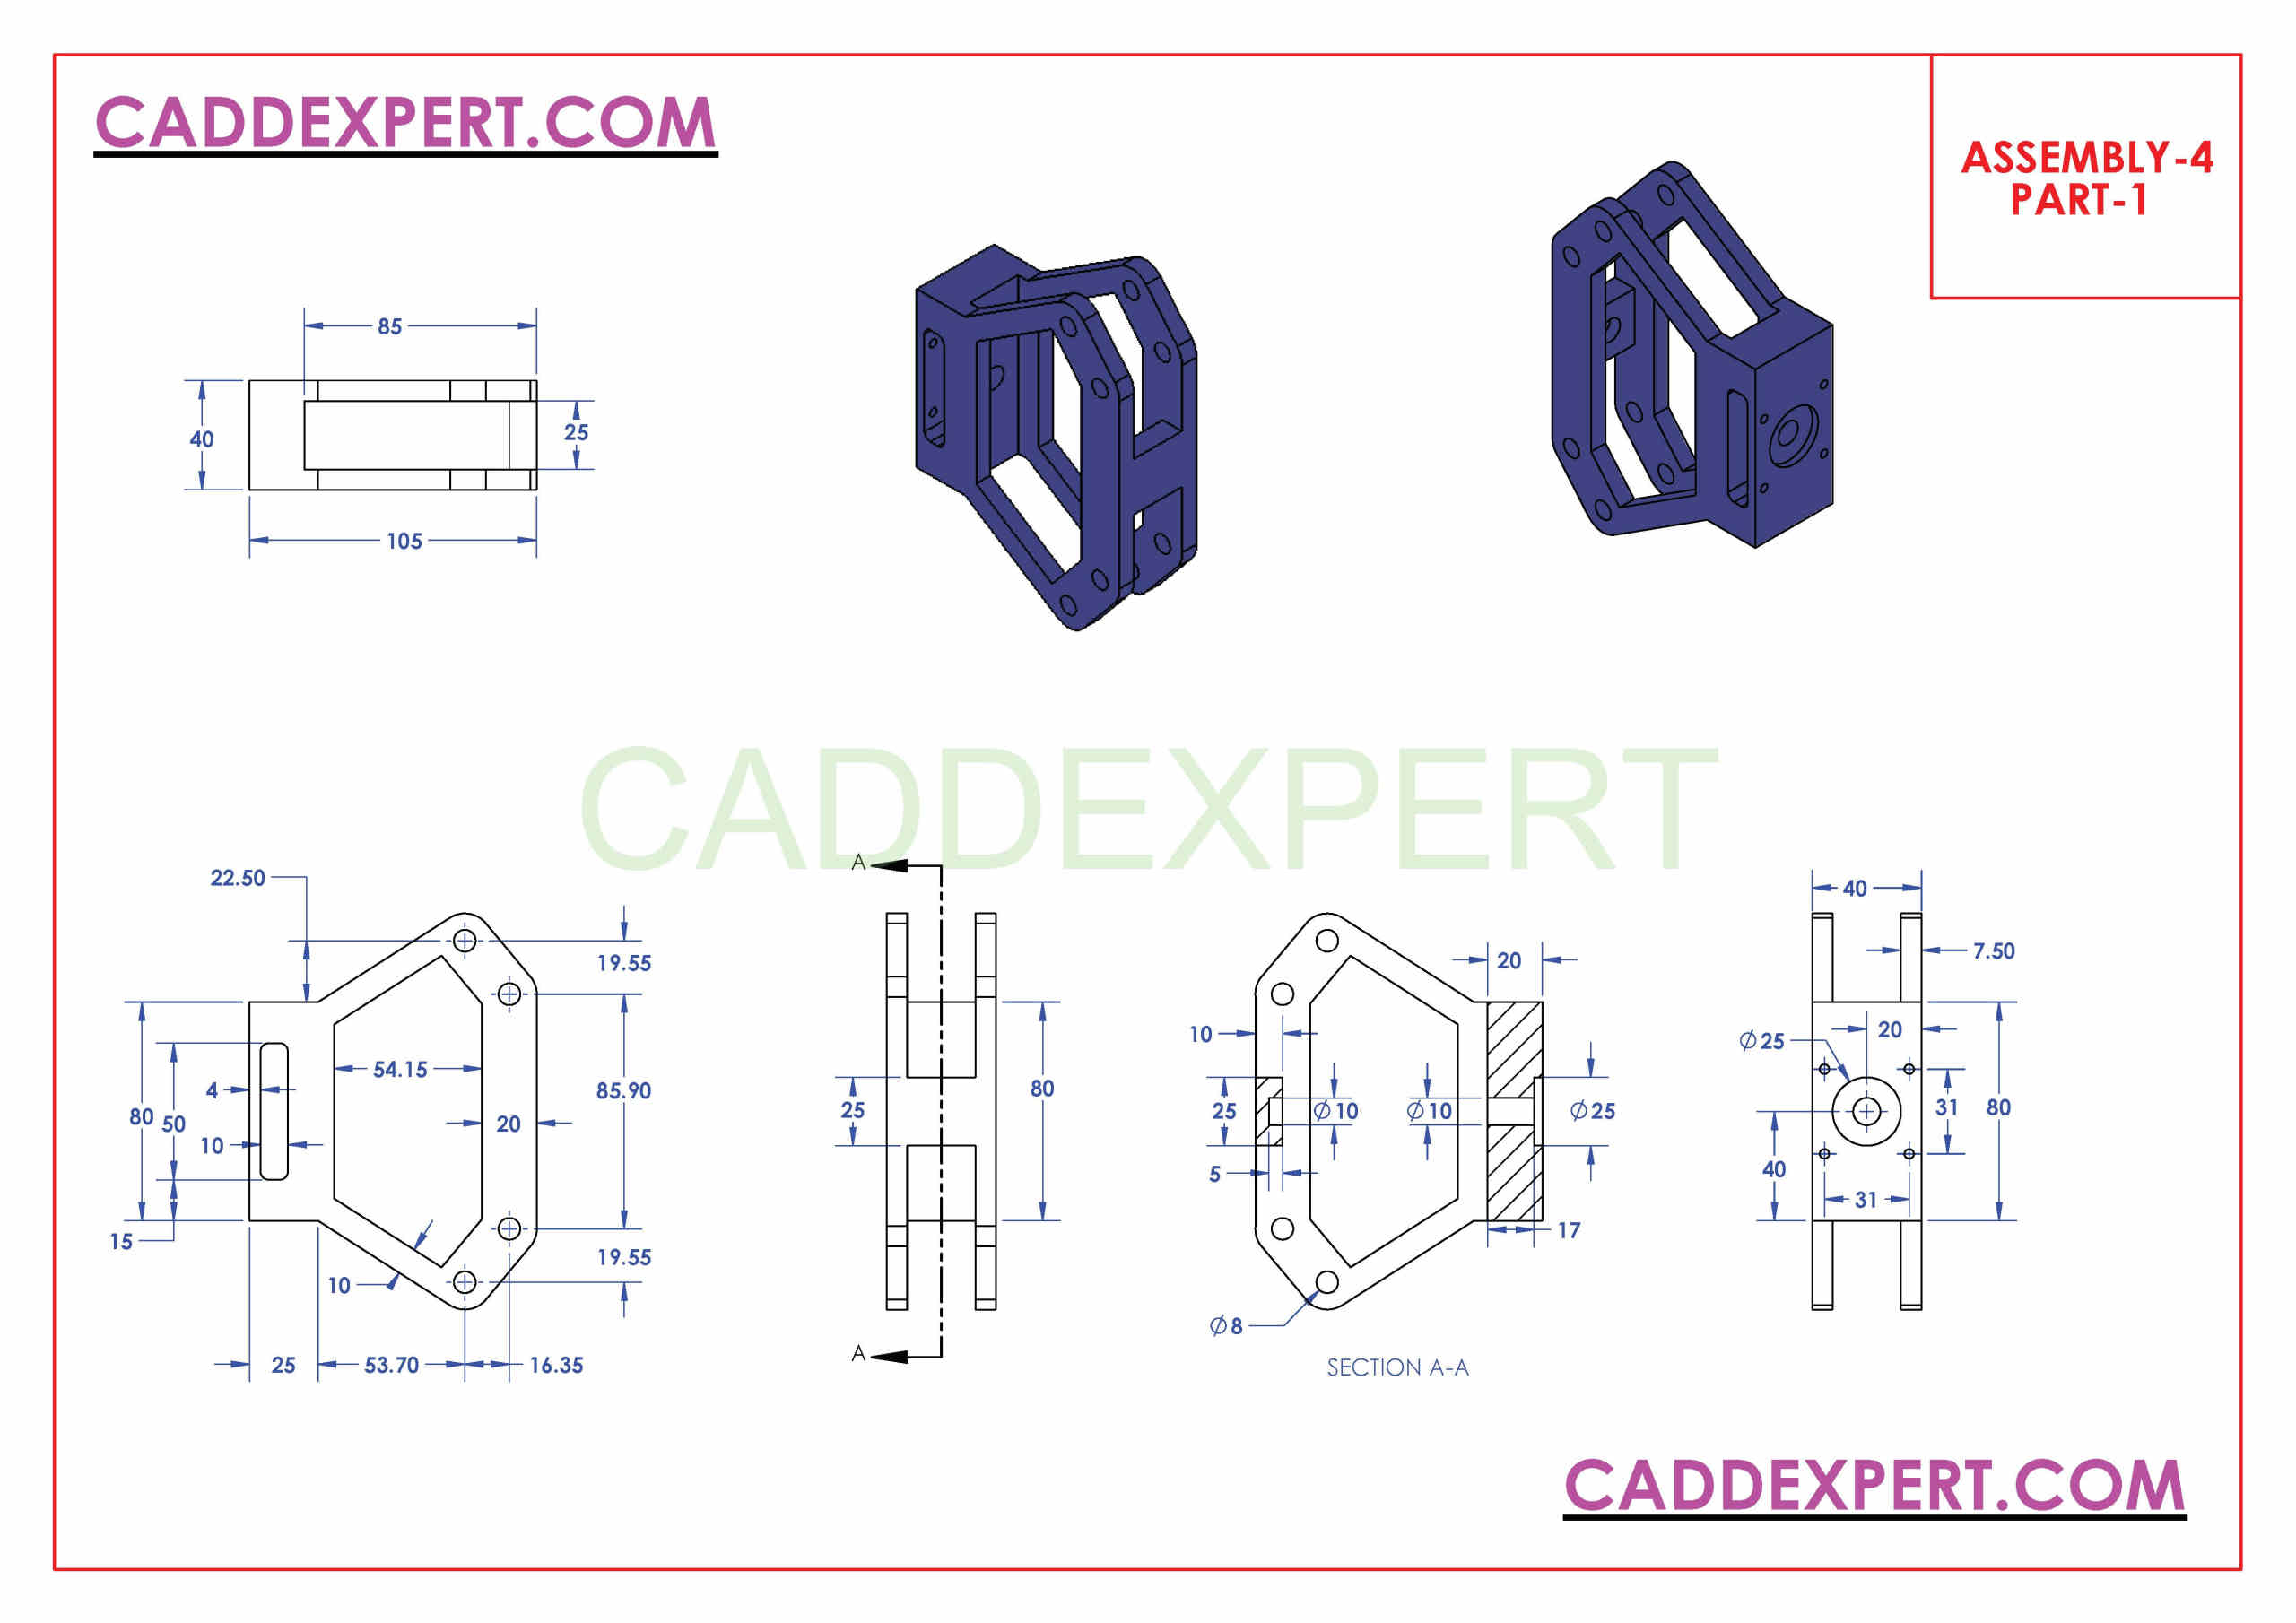 SOLIDWORKS ASSEMBLY DRAWING EXPLODED VIEW PART - 1